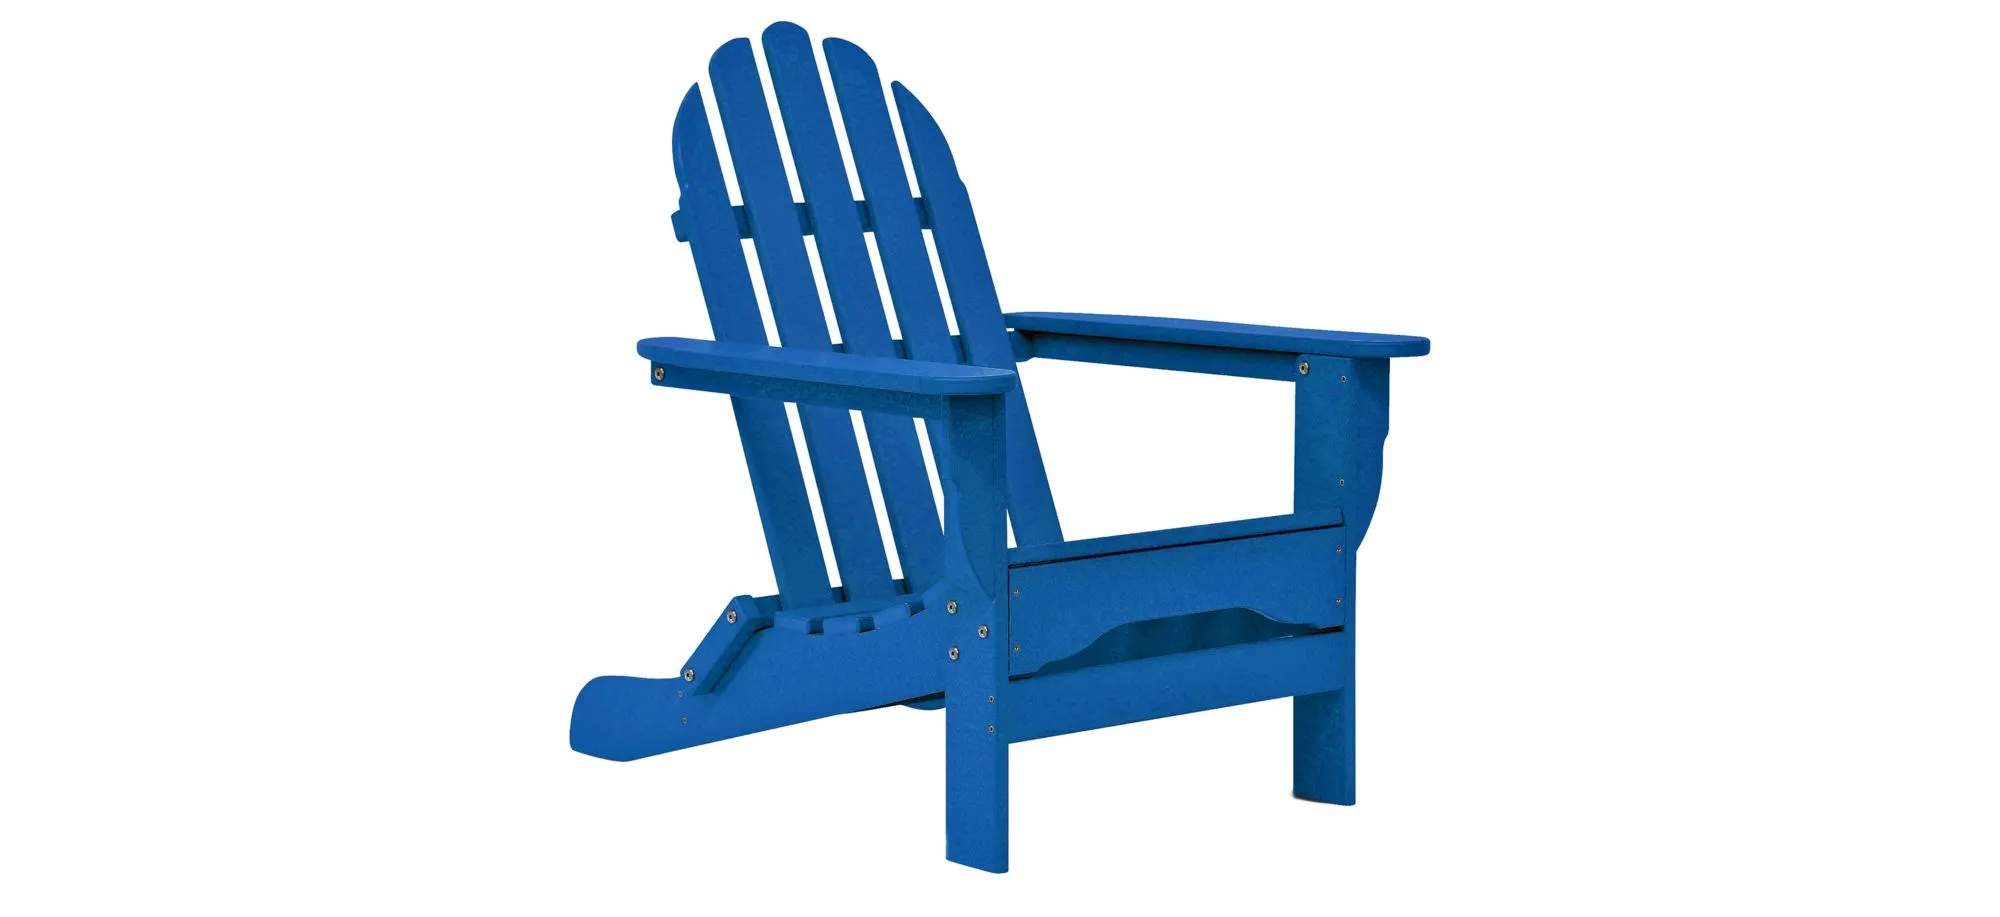 Icon Static Adirondack Chair in "Royal Blue" by DUROGREEN OUTDOOR